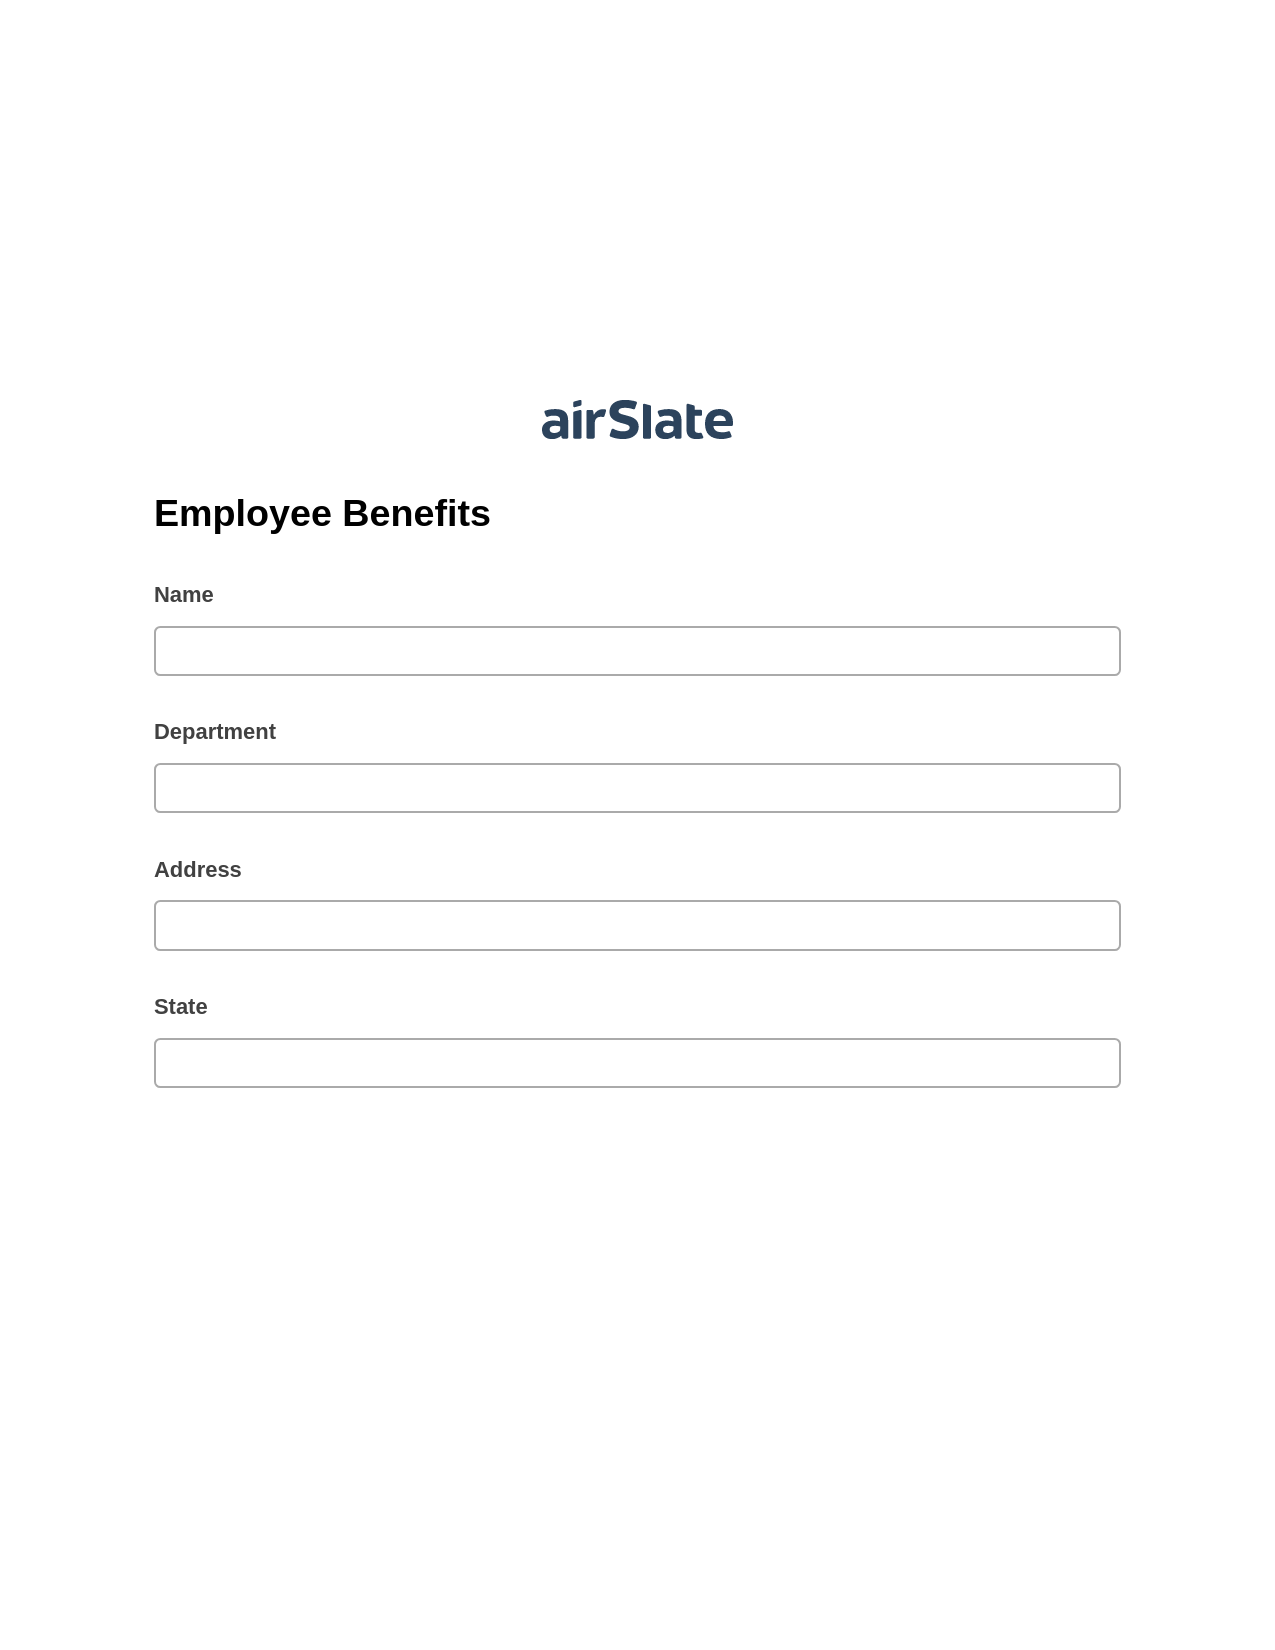 Employee Benefits Pre-fill from MySQL Bot, Webhook Bot, Export to Excel 365 Bot